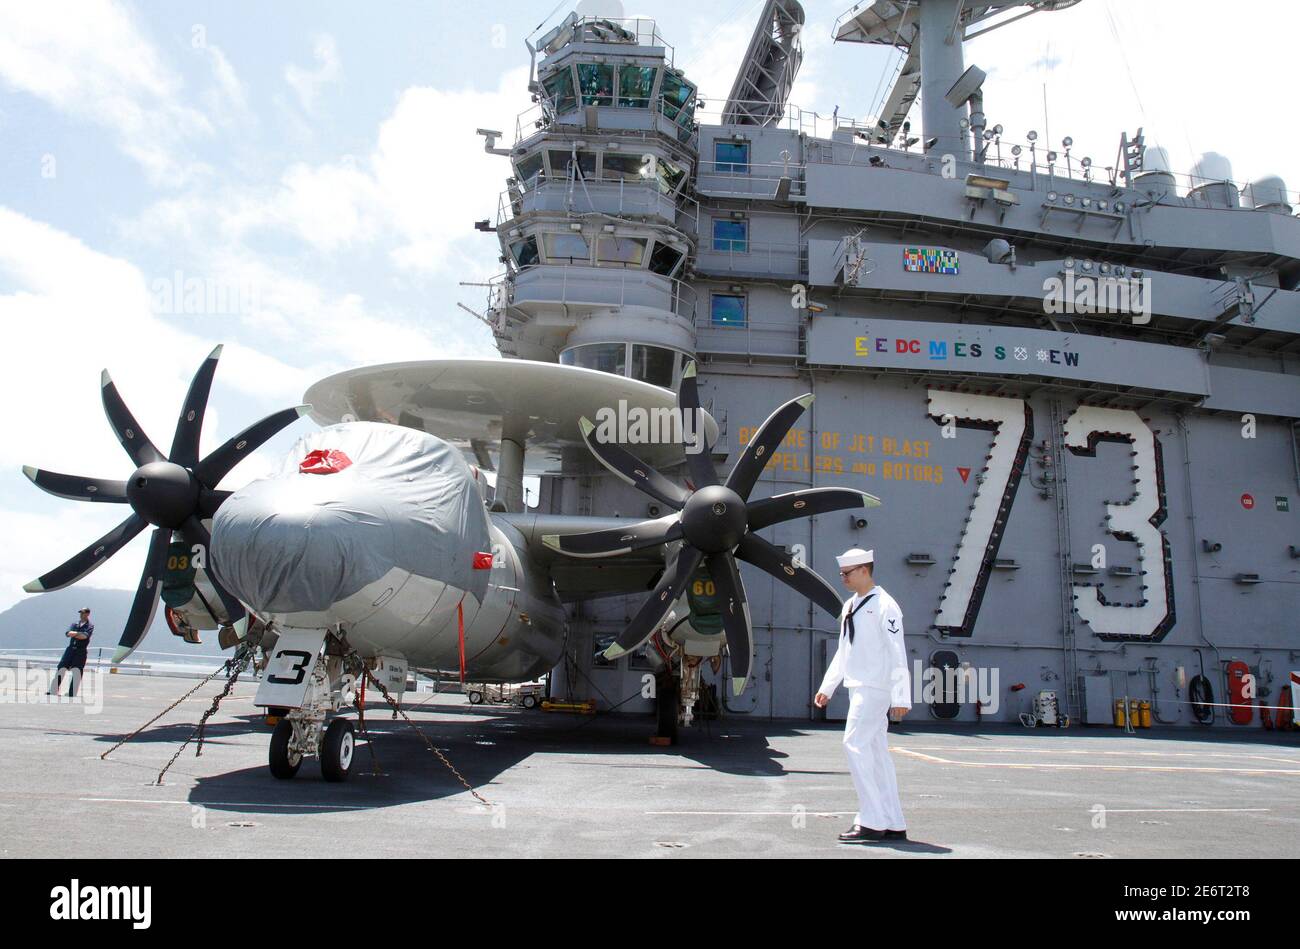 A U.S. Navy sailor of the nuclear-powered aircraft carrier USS George  Washington walks past a E-2C Hawkeye aircraft on a flight deck after the  aircraft arrived at a South Korean naval base